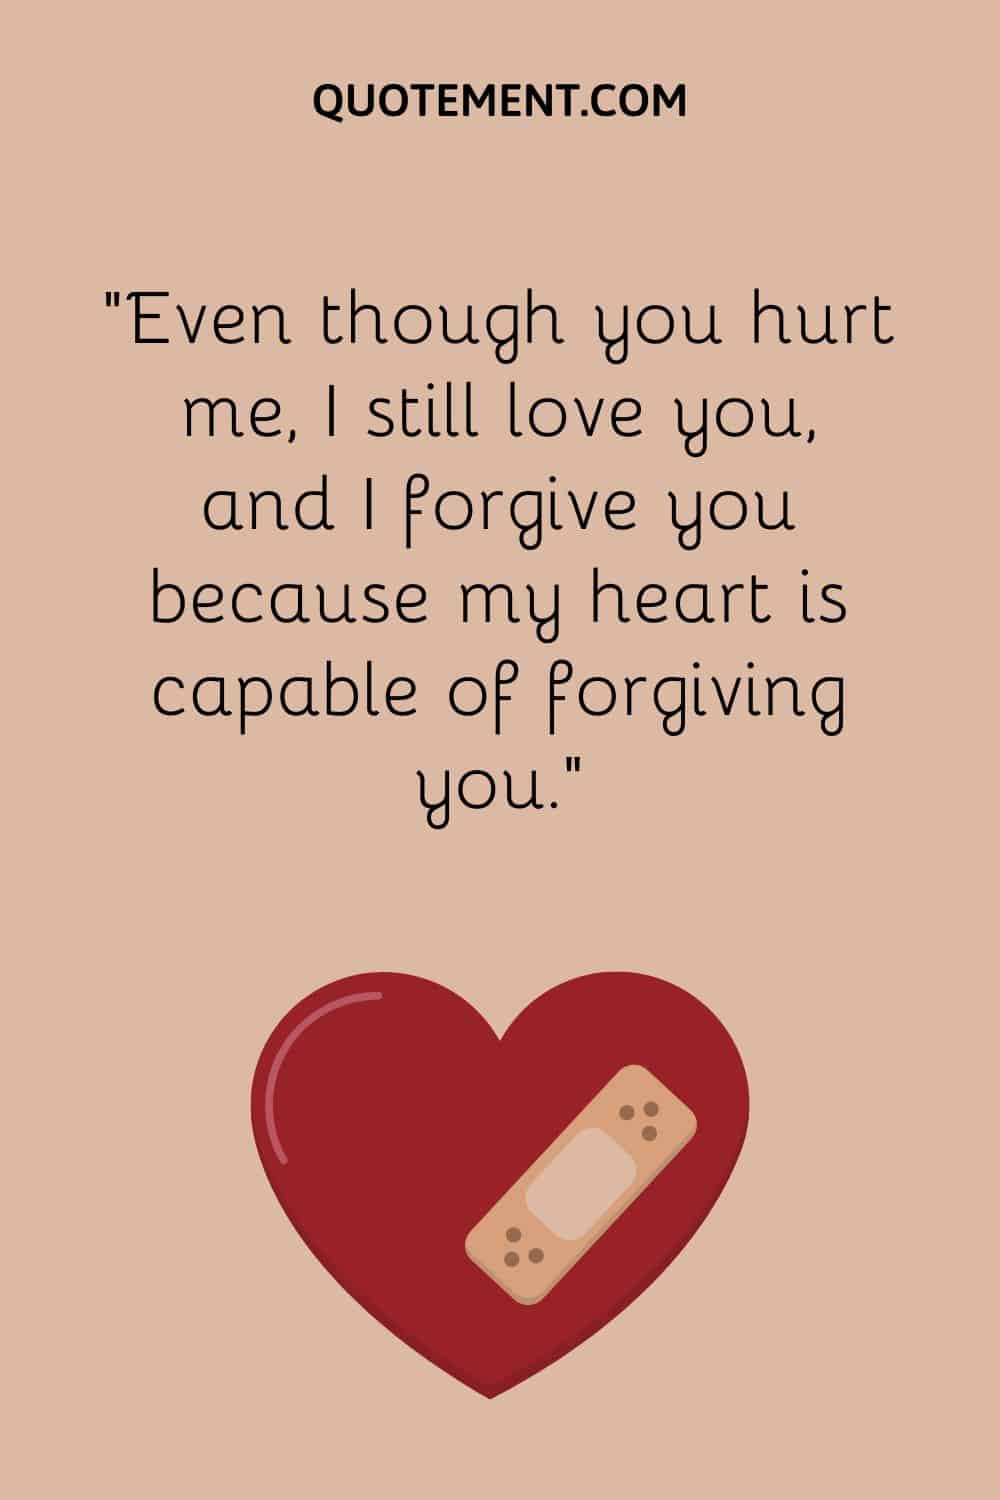 Even though you hurt me, I still love you